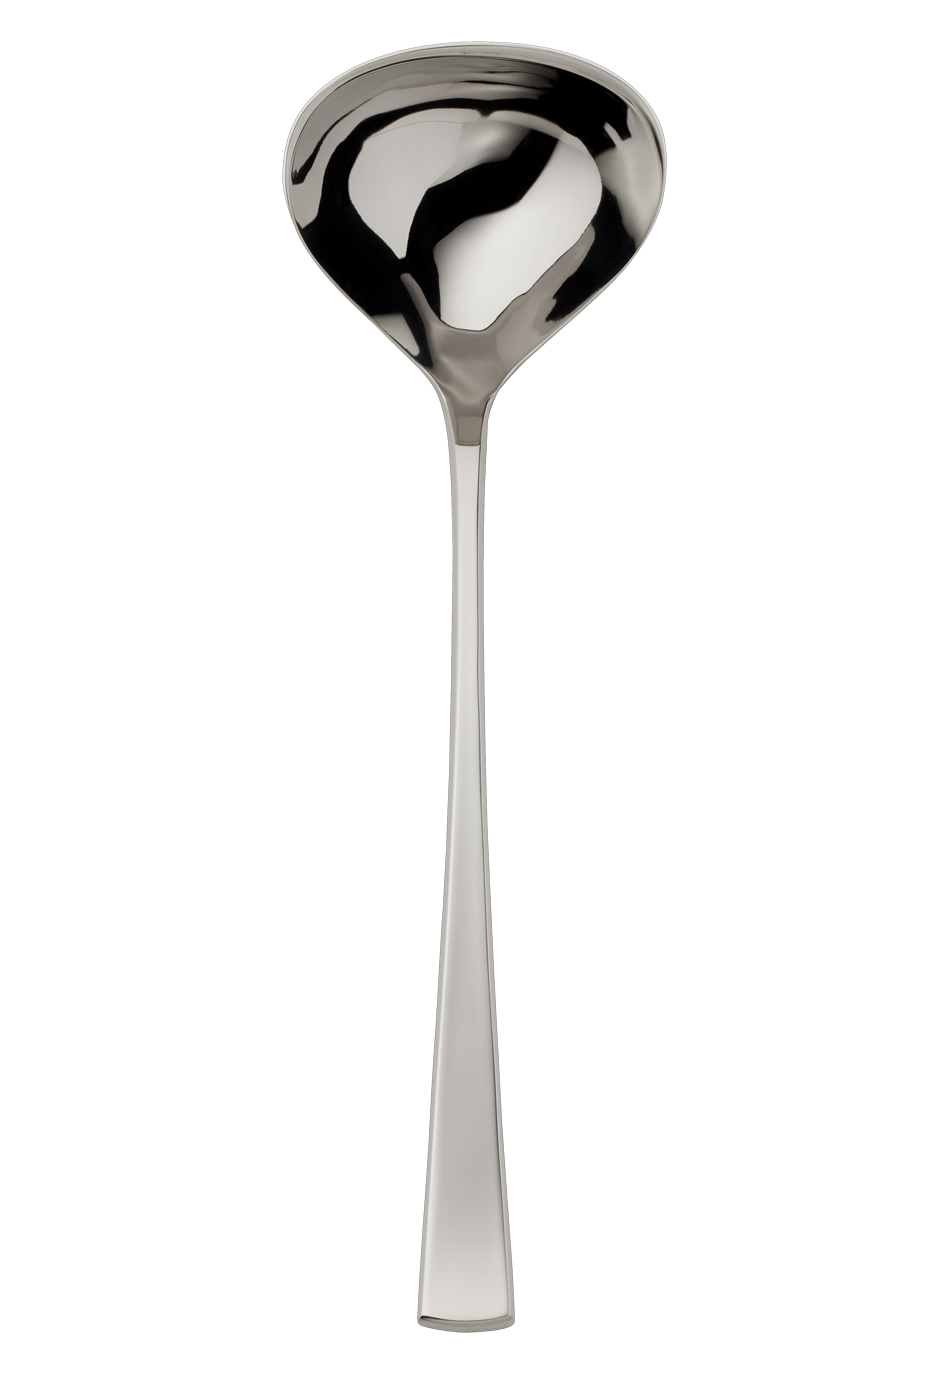 York Soup Ladle (18/8 stainless steel)